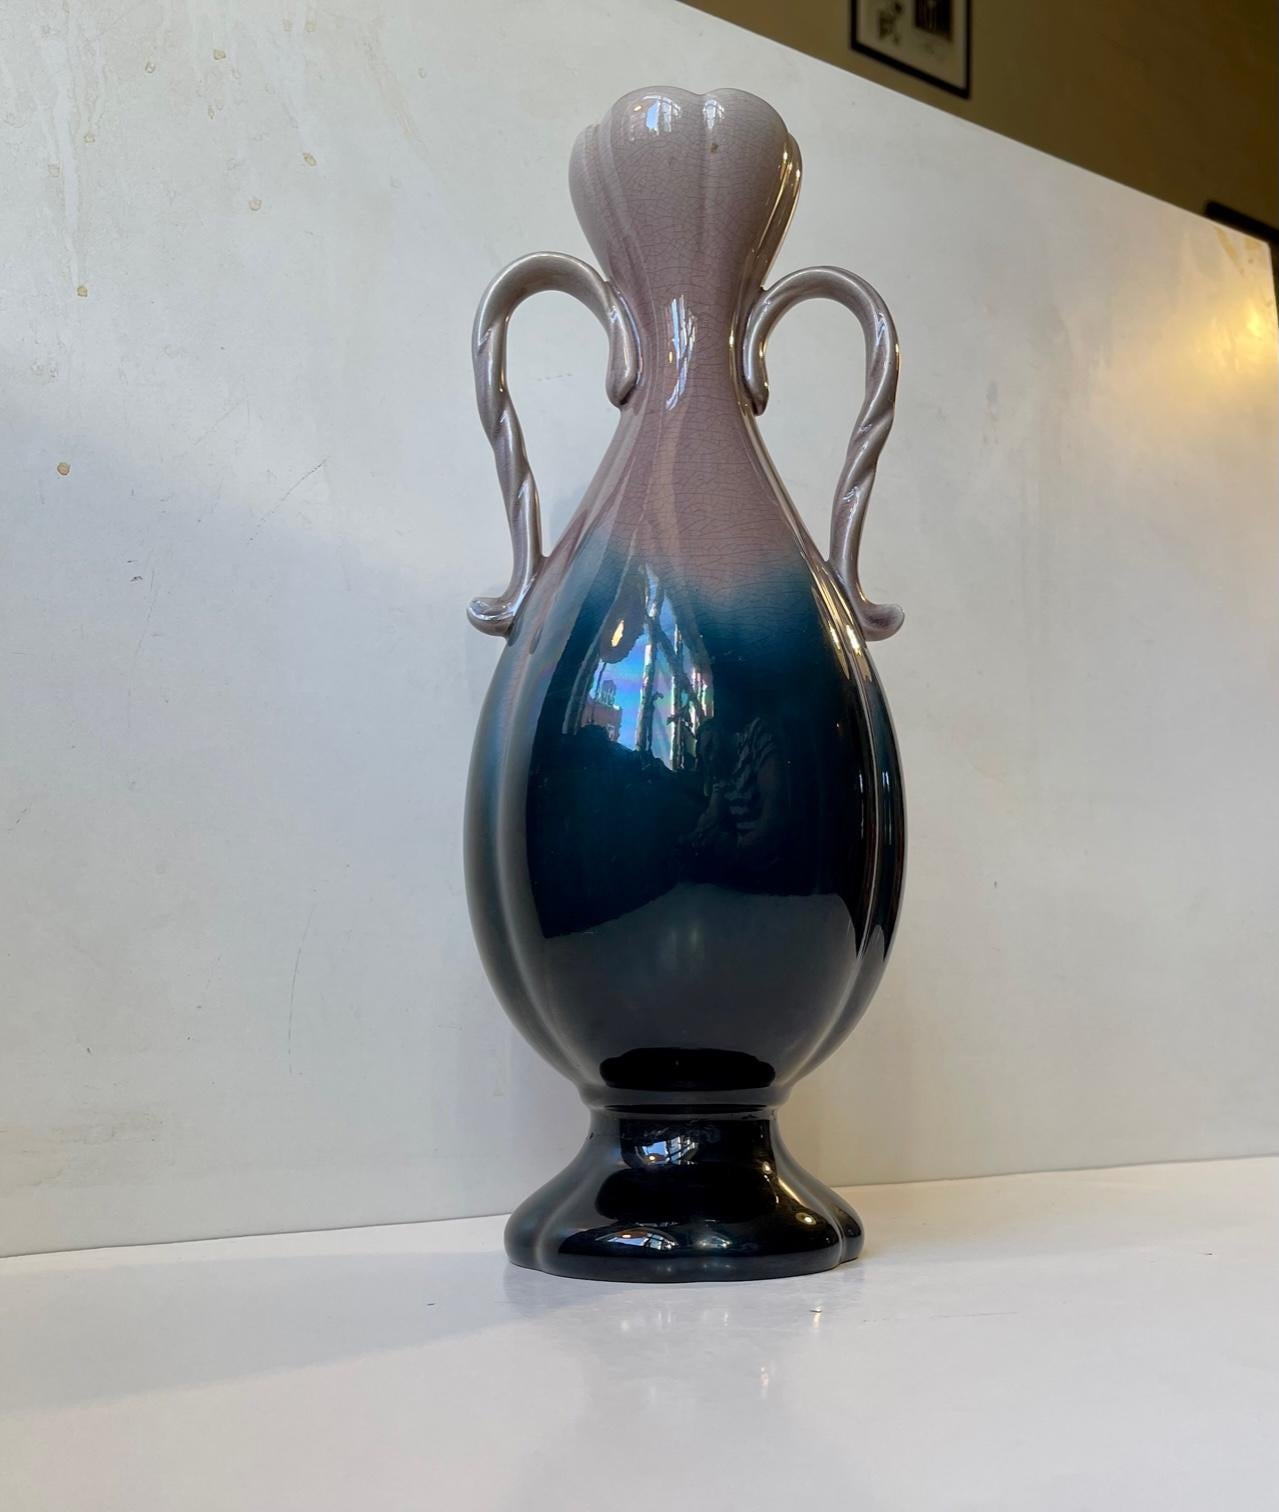 Large porcelain/creamware vase / urn made by Swedish porcelain gigant Rörstrand circa 1910. It has a grey/petrol blue glaze that fades from dark to light. The inside has a turquoise glaze. Measurements: H: 35 cm, D: 13/10 cm. Stamped Rörstrand to